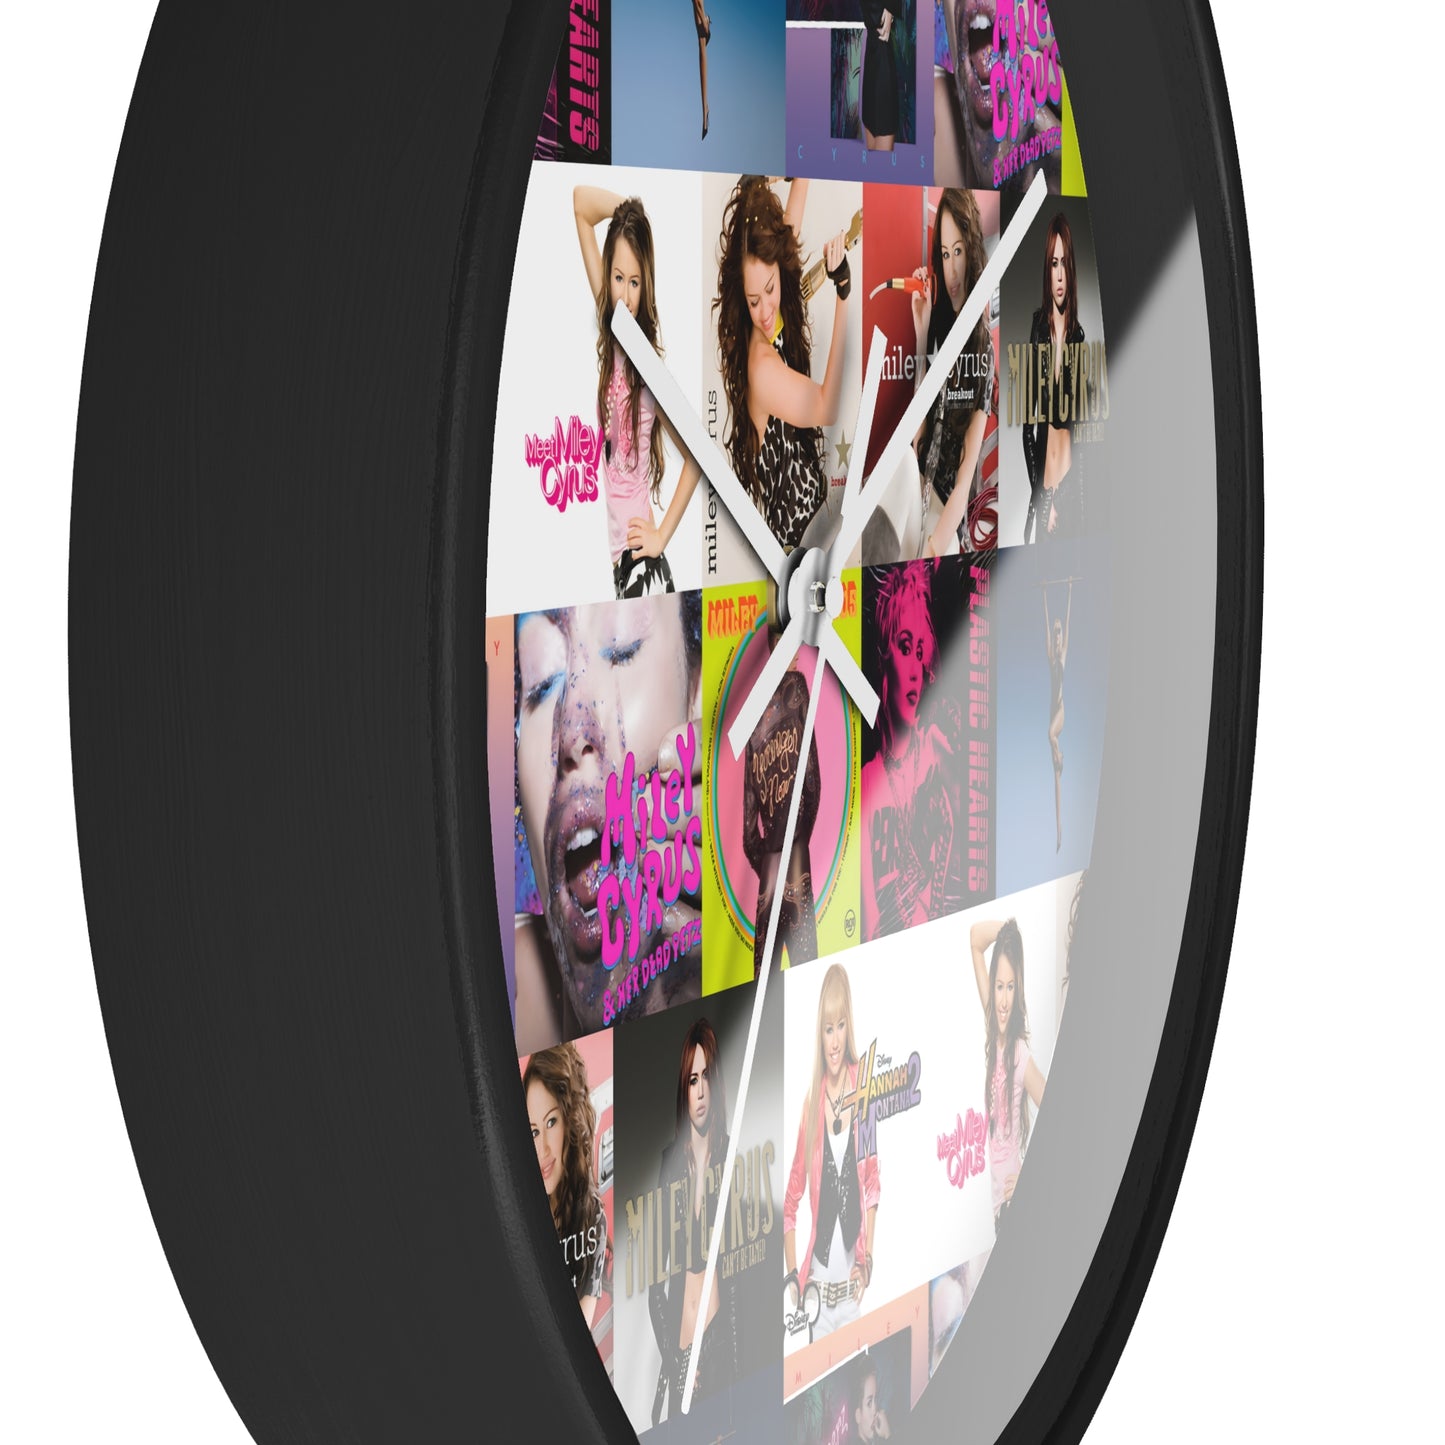 Miley Cyrus Album Cover Collage Round Wall Clock